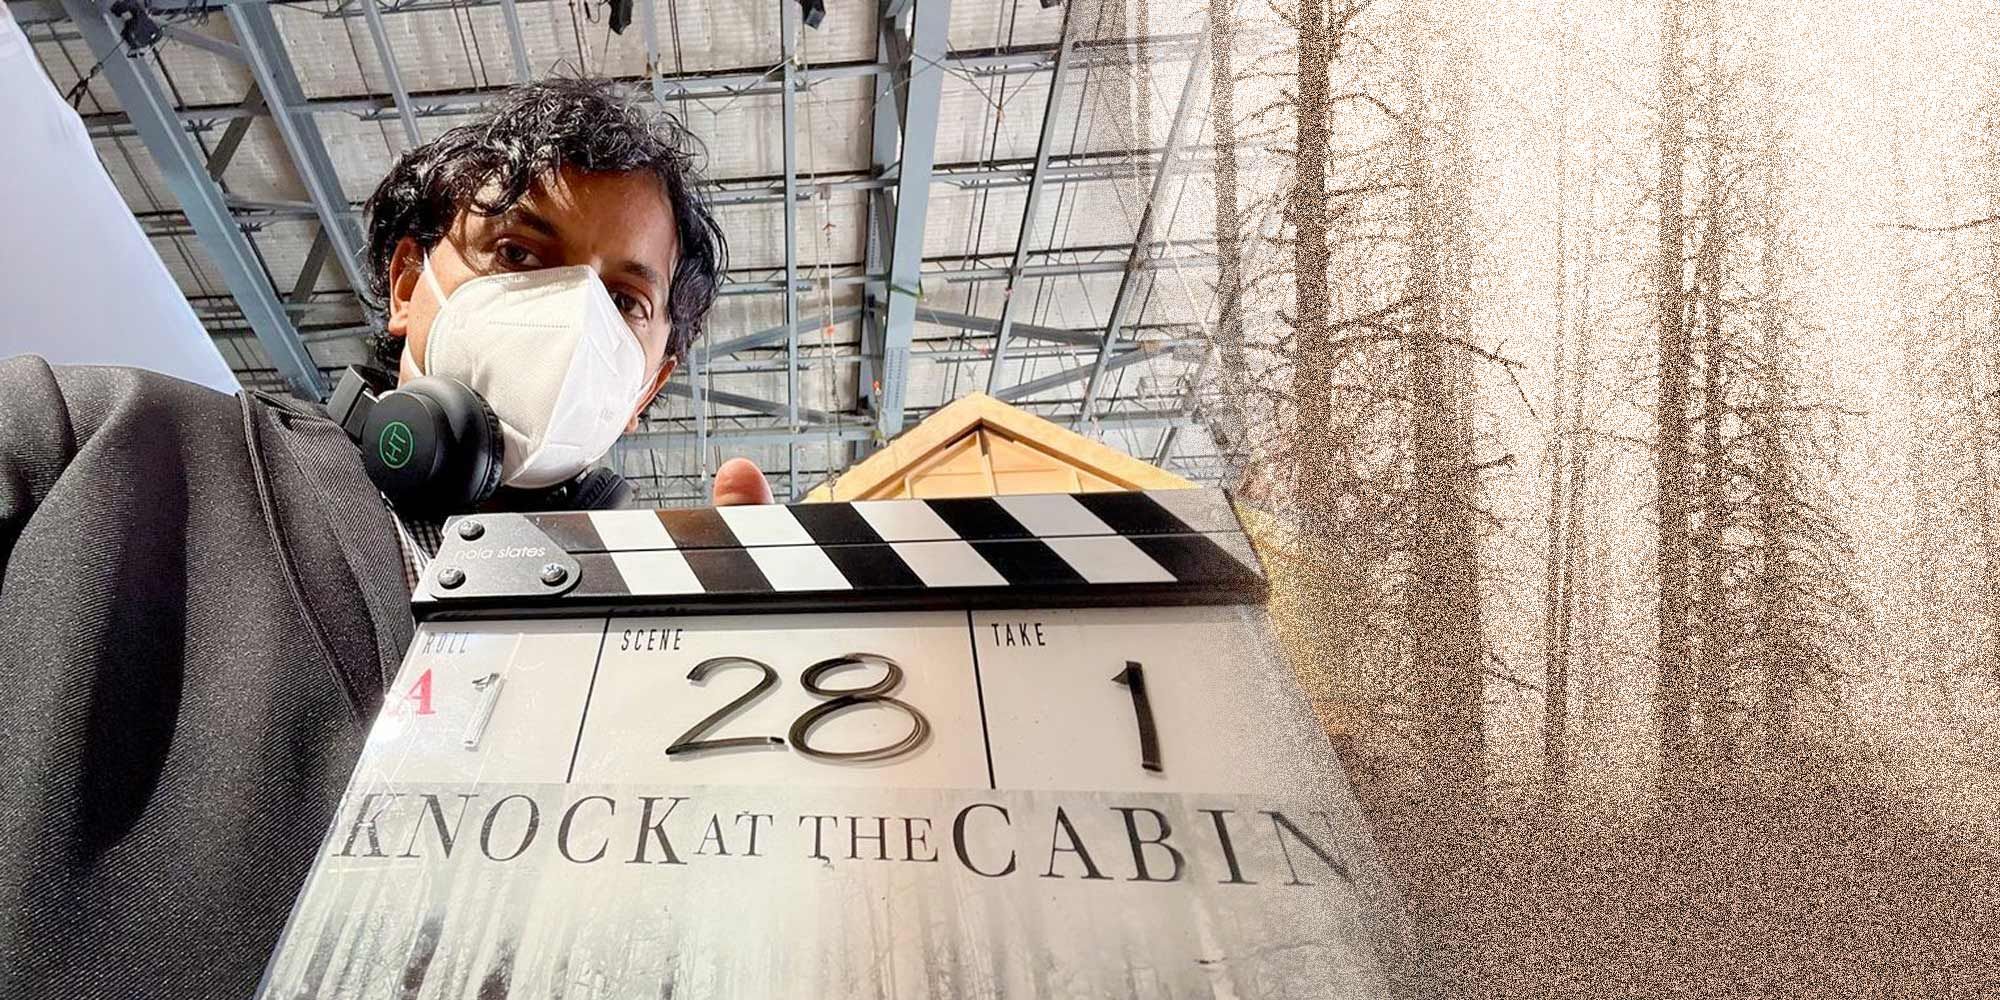 M. Night Shyamalan’s New Movie Knock at the Cabin Starts Filming